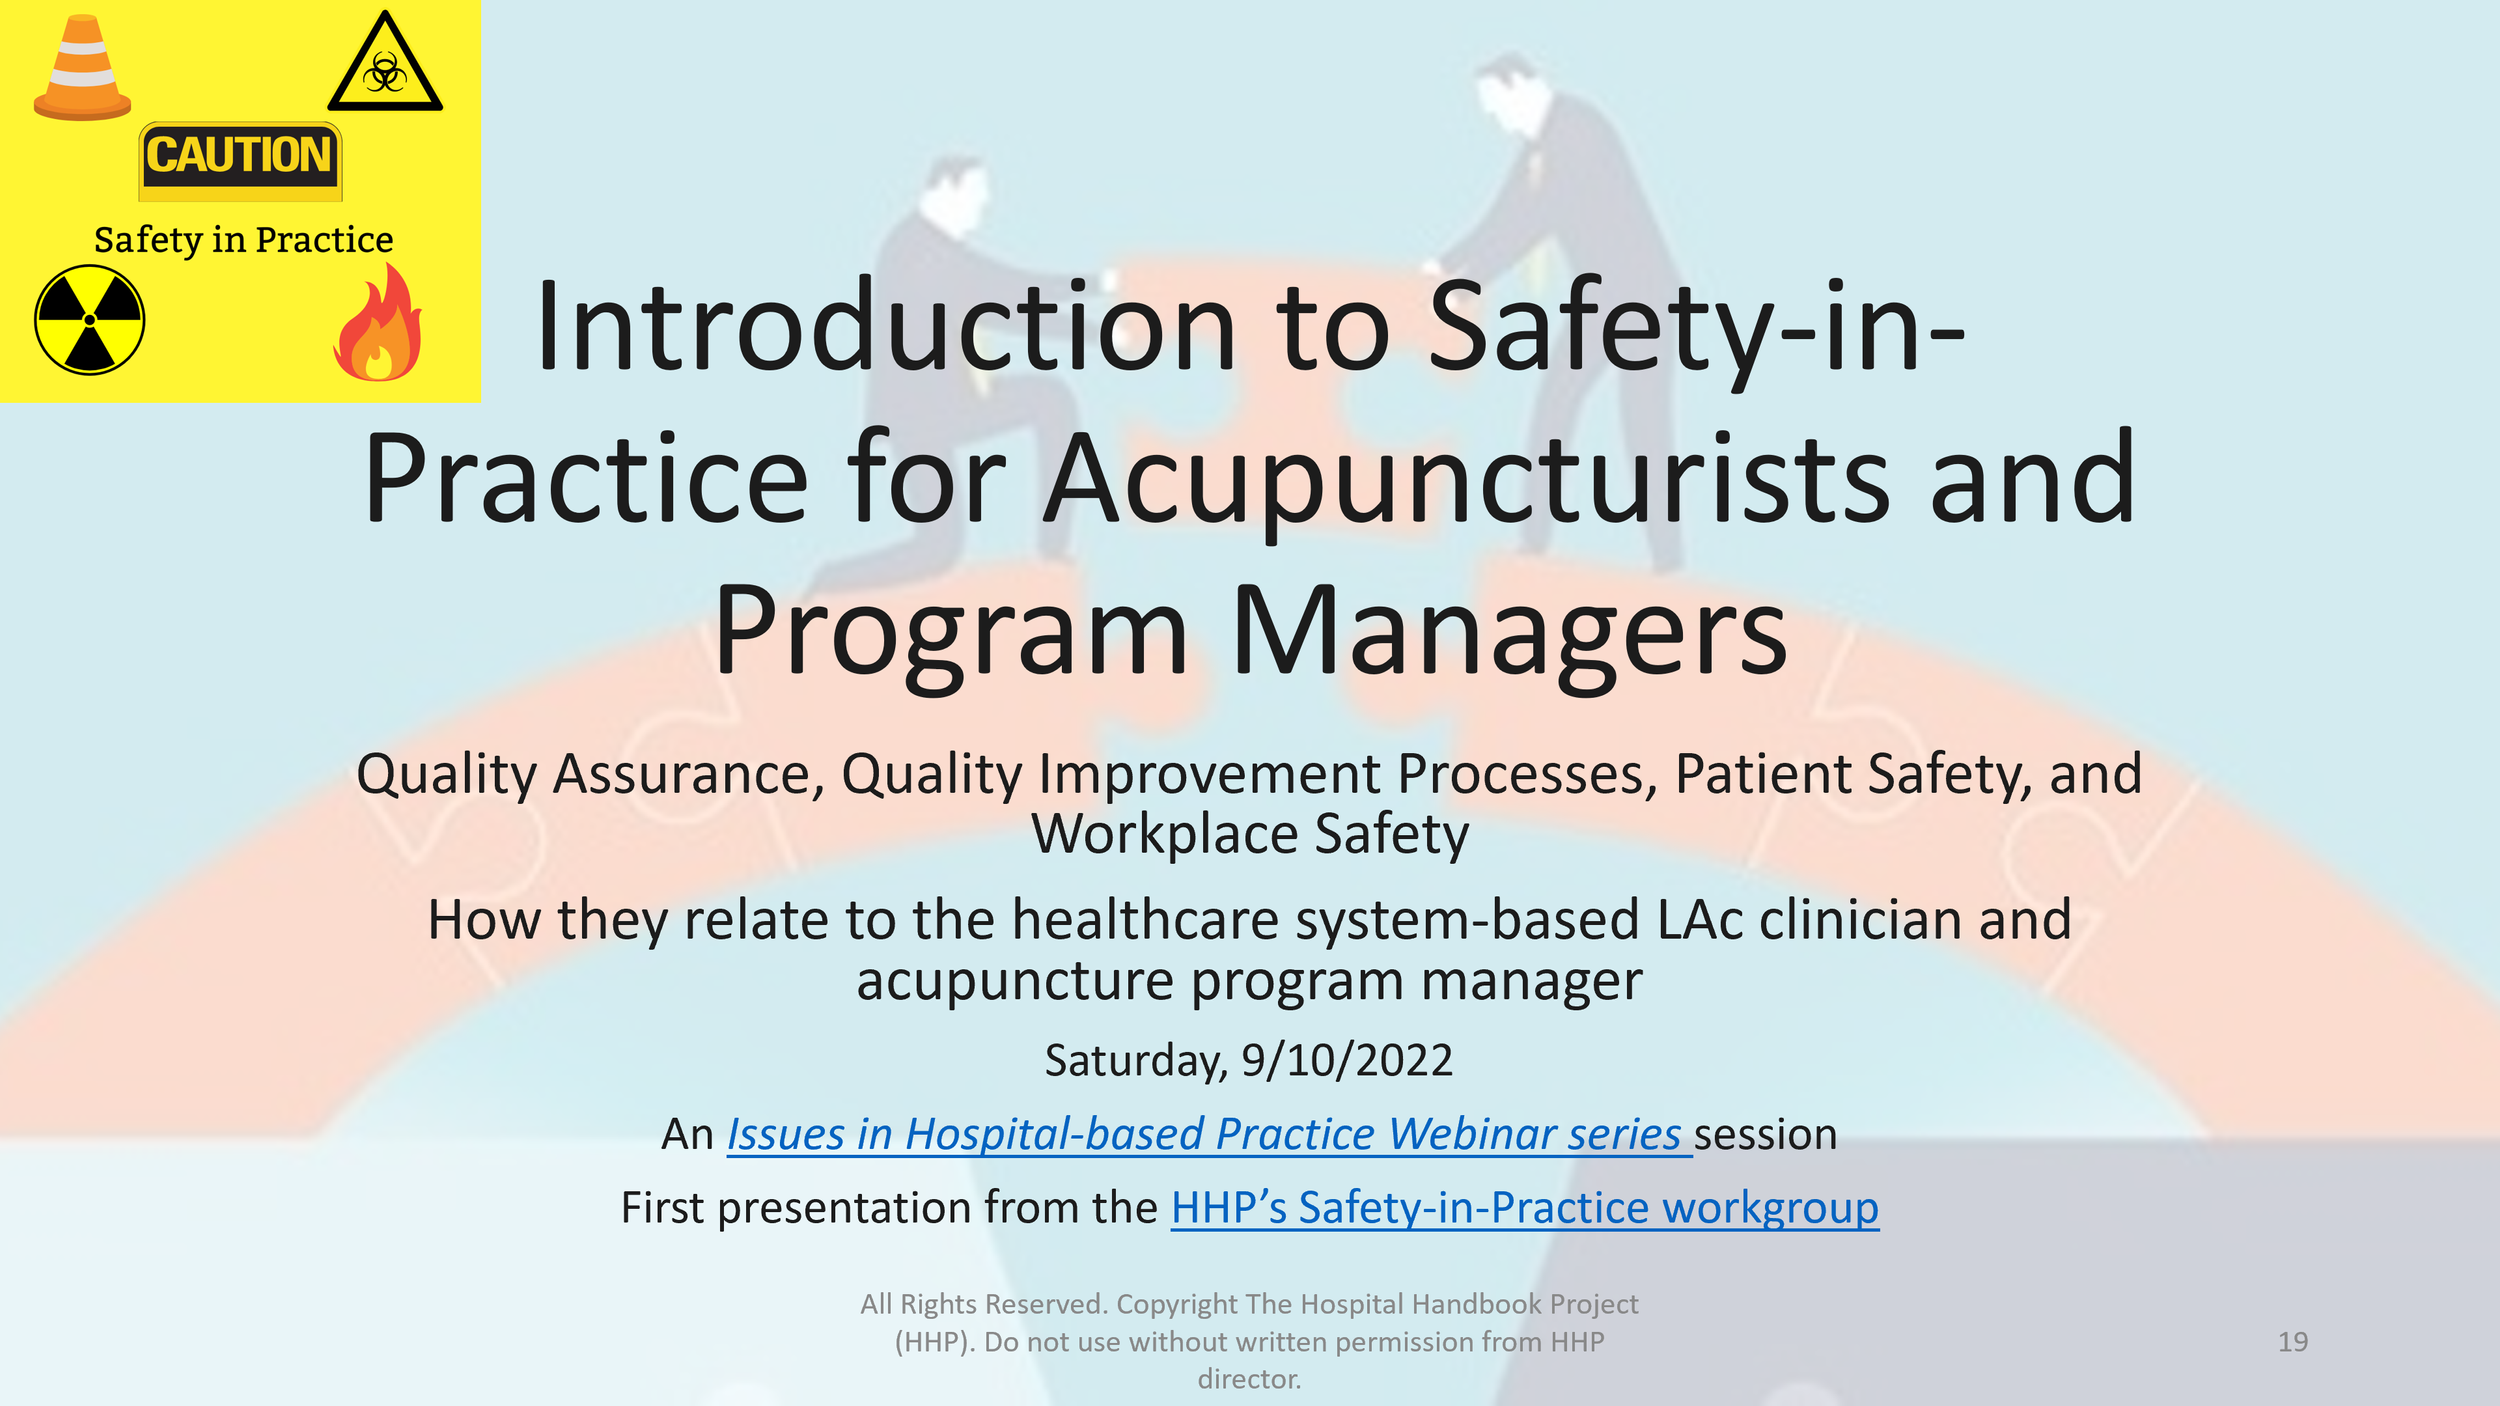 Intro to Safety in Practice title page 9.10.2022 presentation version 2.png